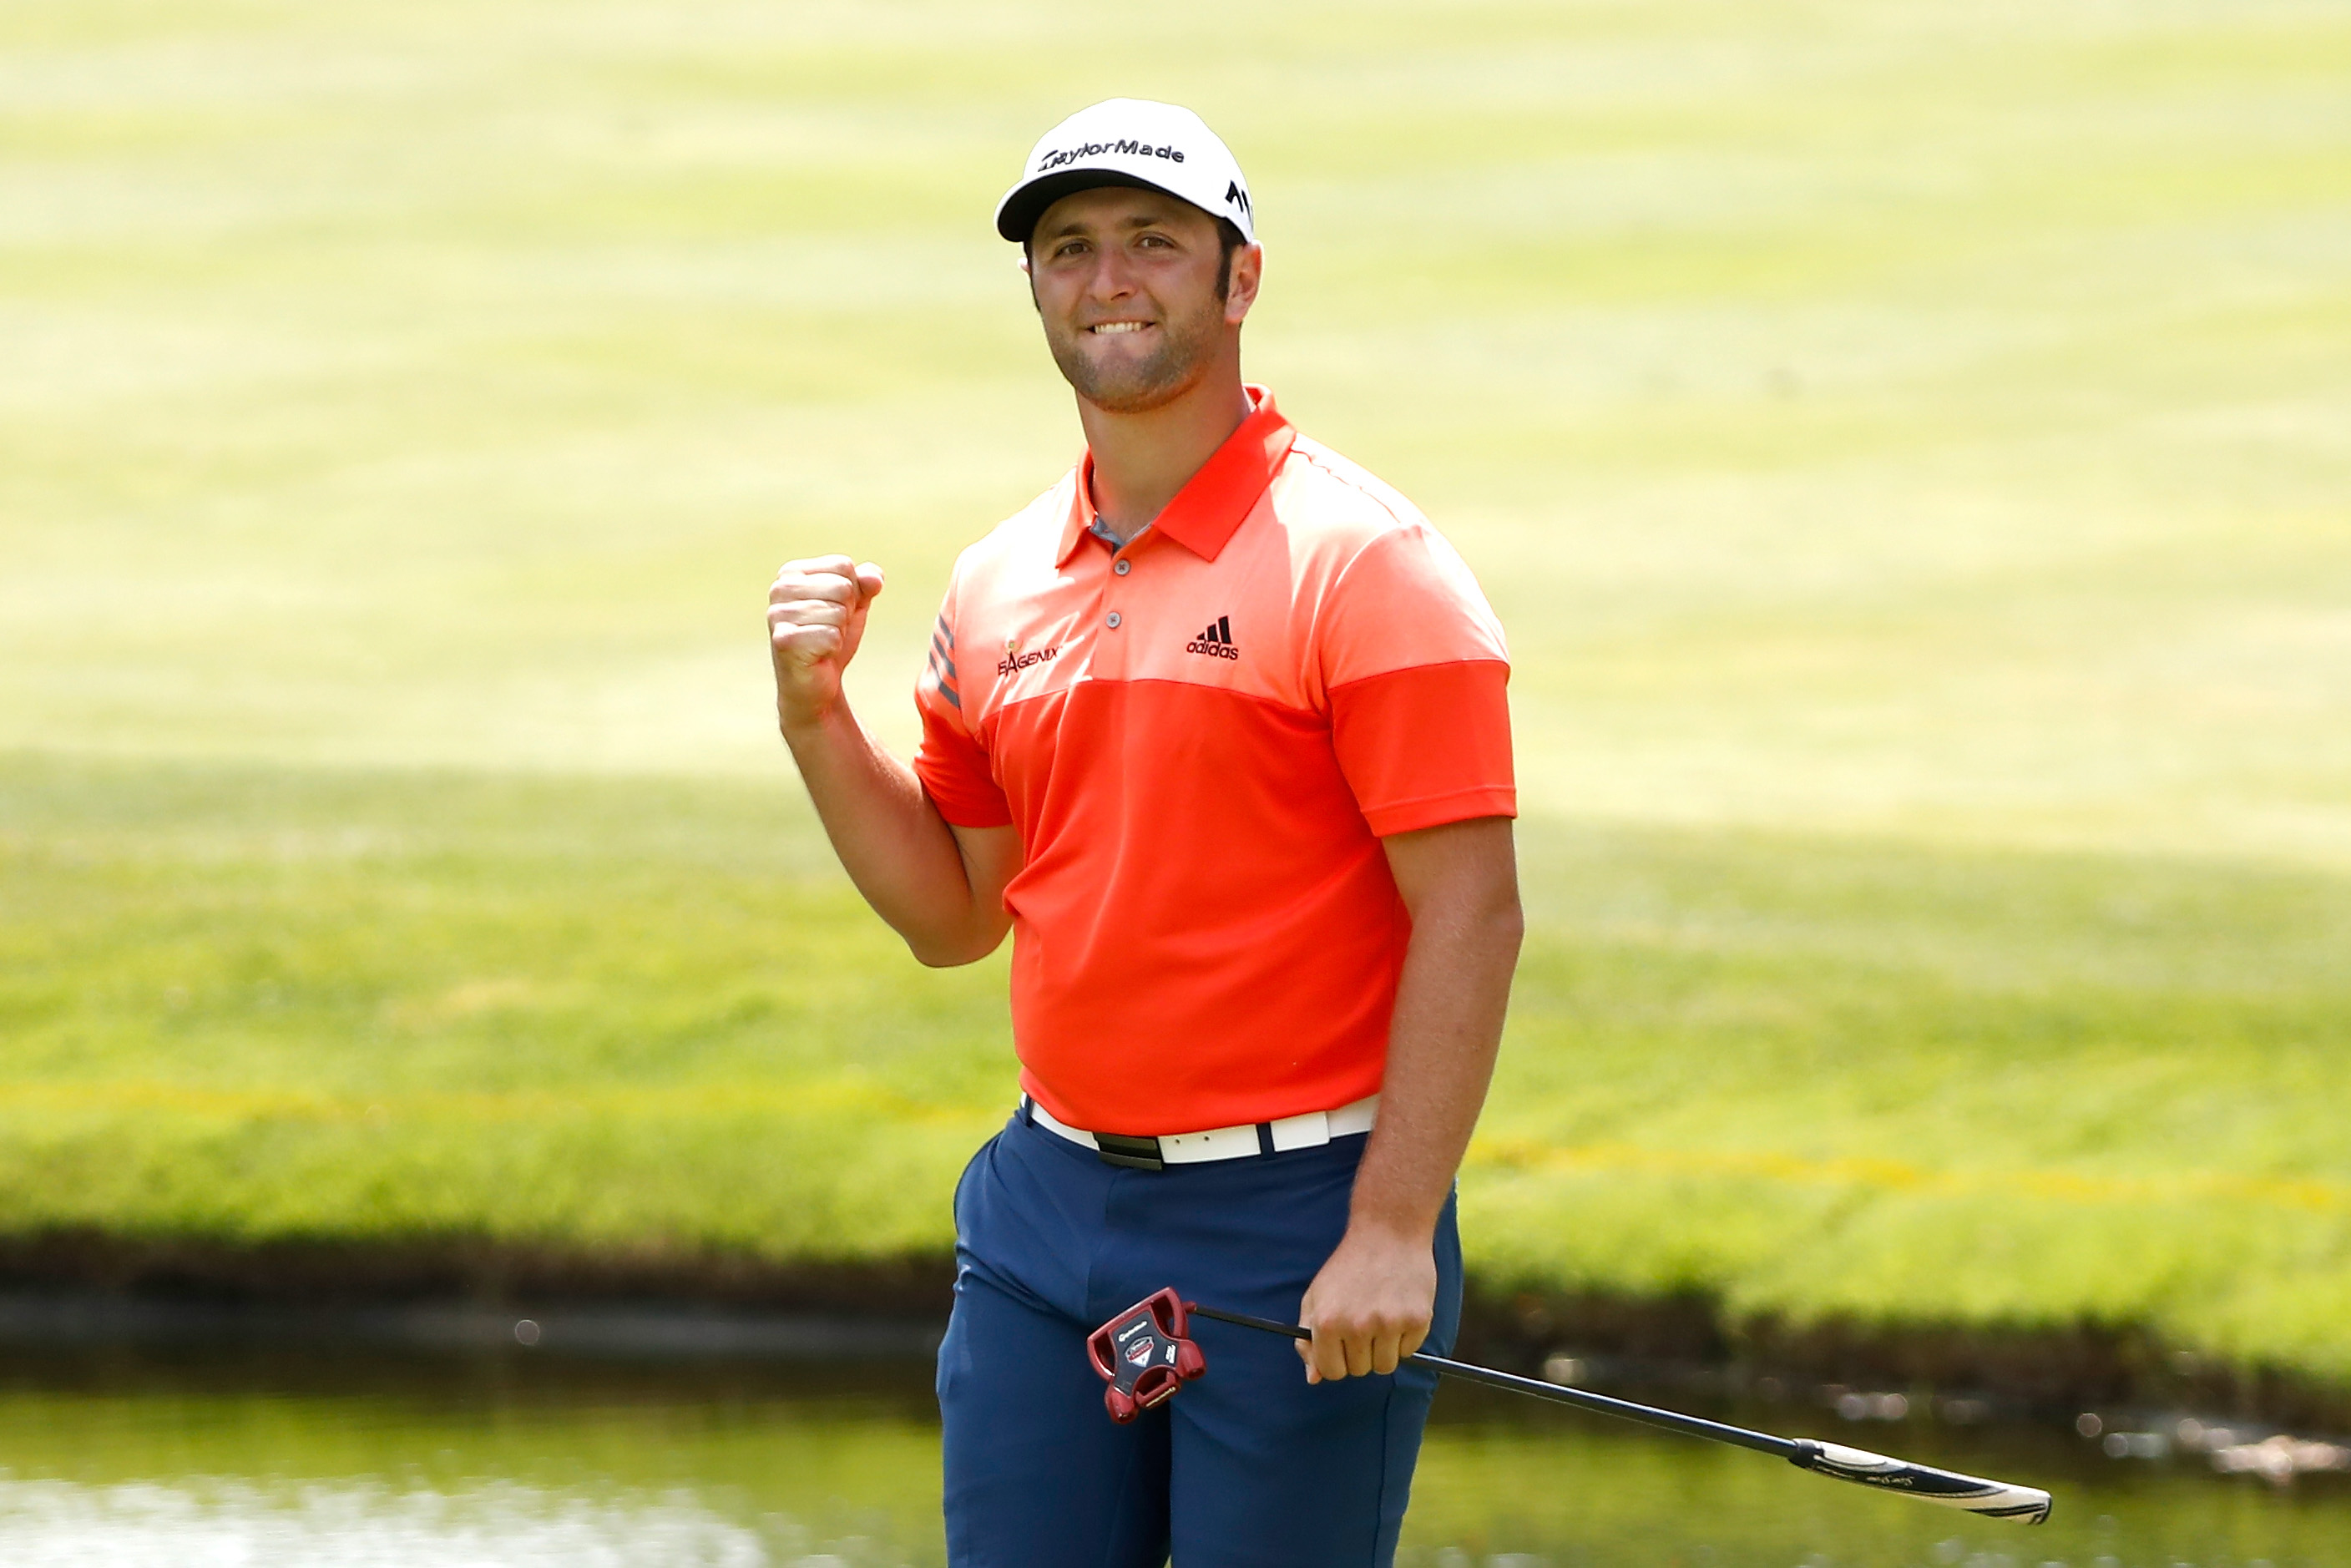 Watch Jon Rahm Sink Hole-in-One Ahead of Masters Tournament on His